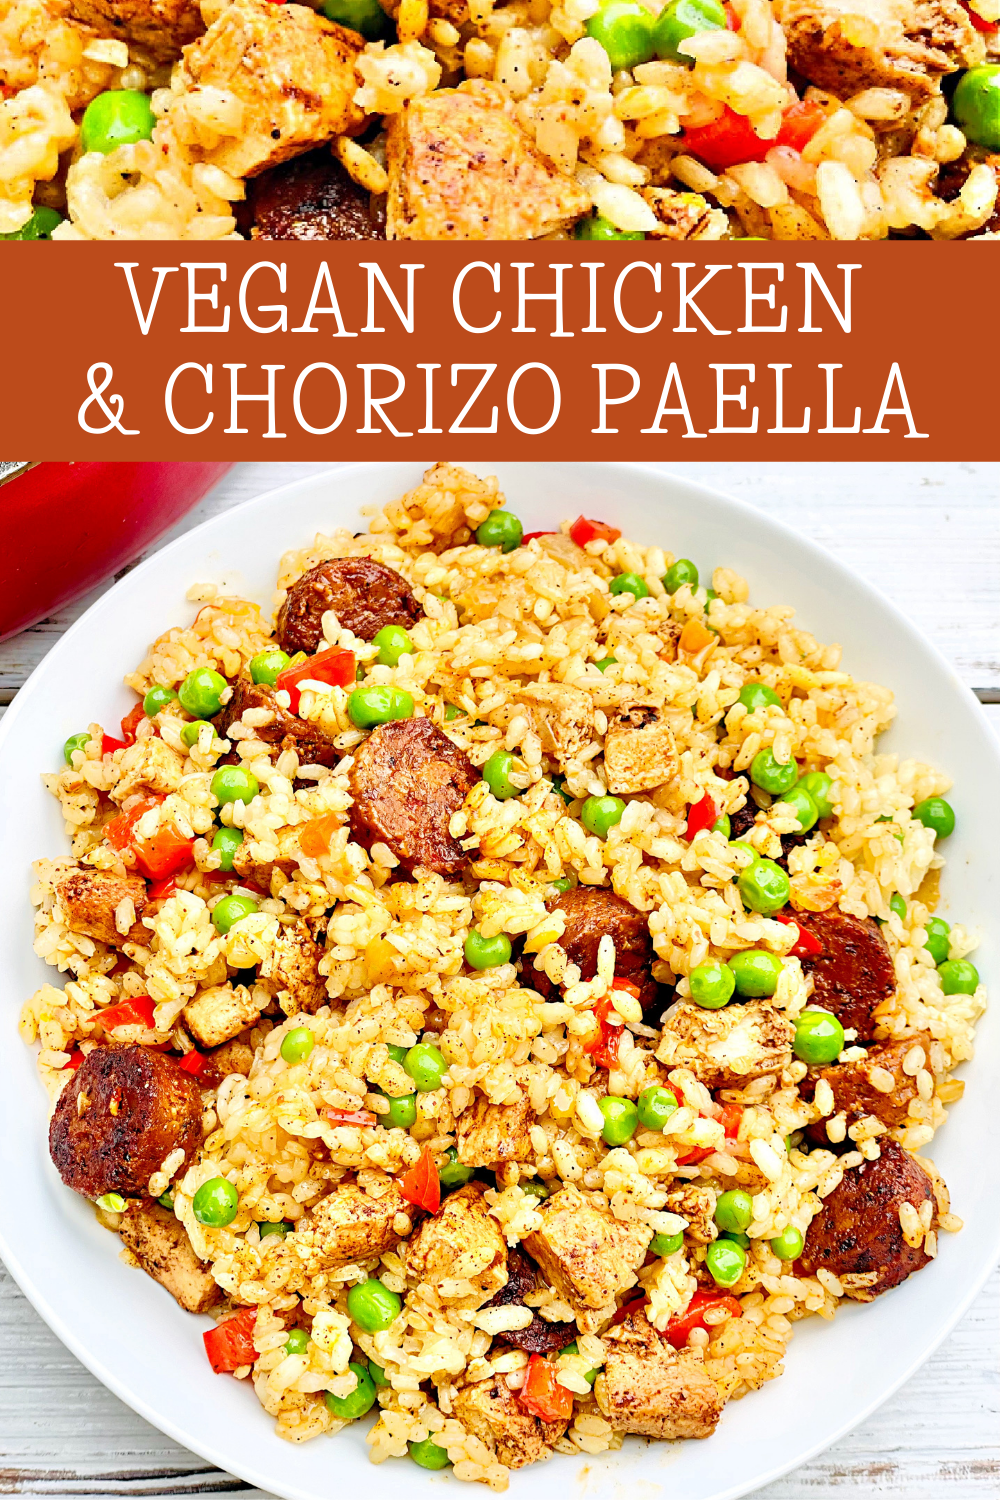 Plant-based chicken and vegan Mexican-style chorizo sausage with saffron-infused rice and fresh veggies. A hearty and flavorful Spanish-inspired dinner your family will love!  via @thiswifecooks